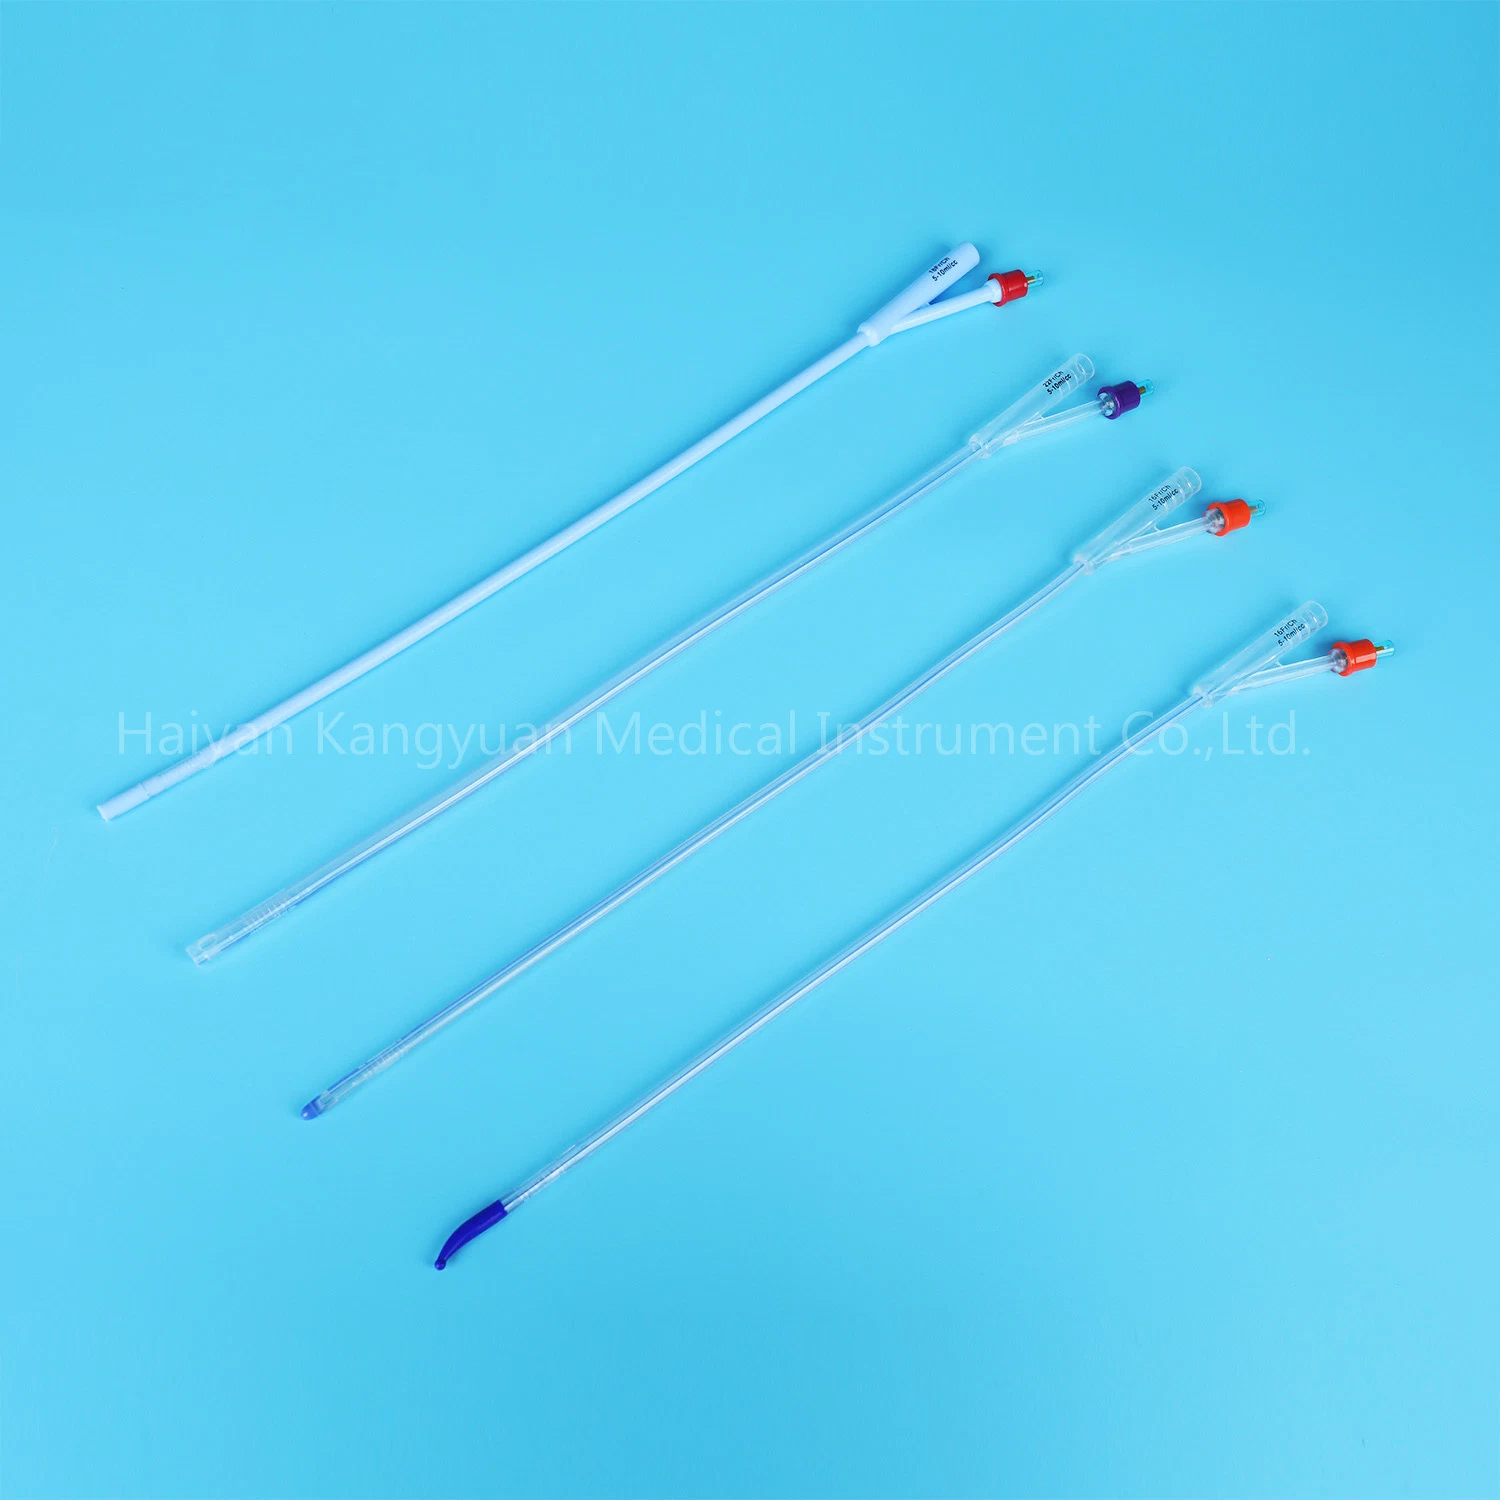 Silicone Integrated Flat Balloon Urinary Catheter with Unibal Integral Balloon Technology Open Tipped Suprapubic Use 2 Way Transparent